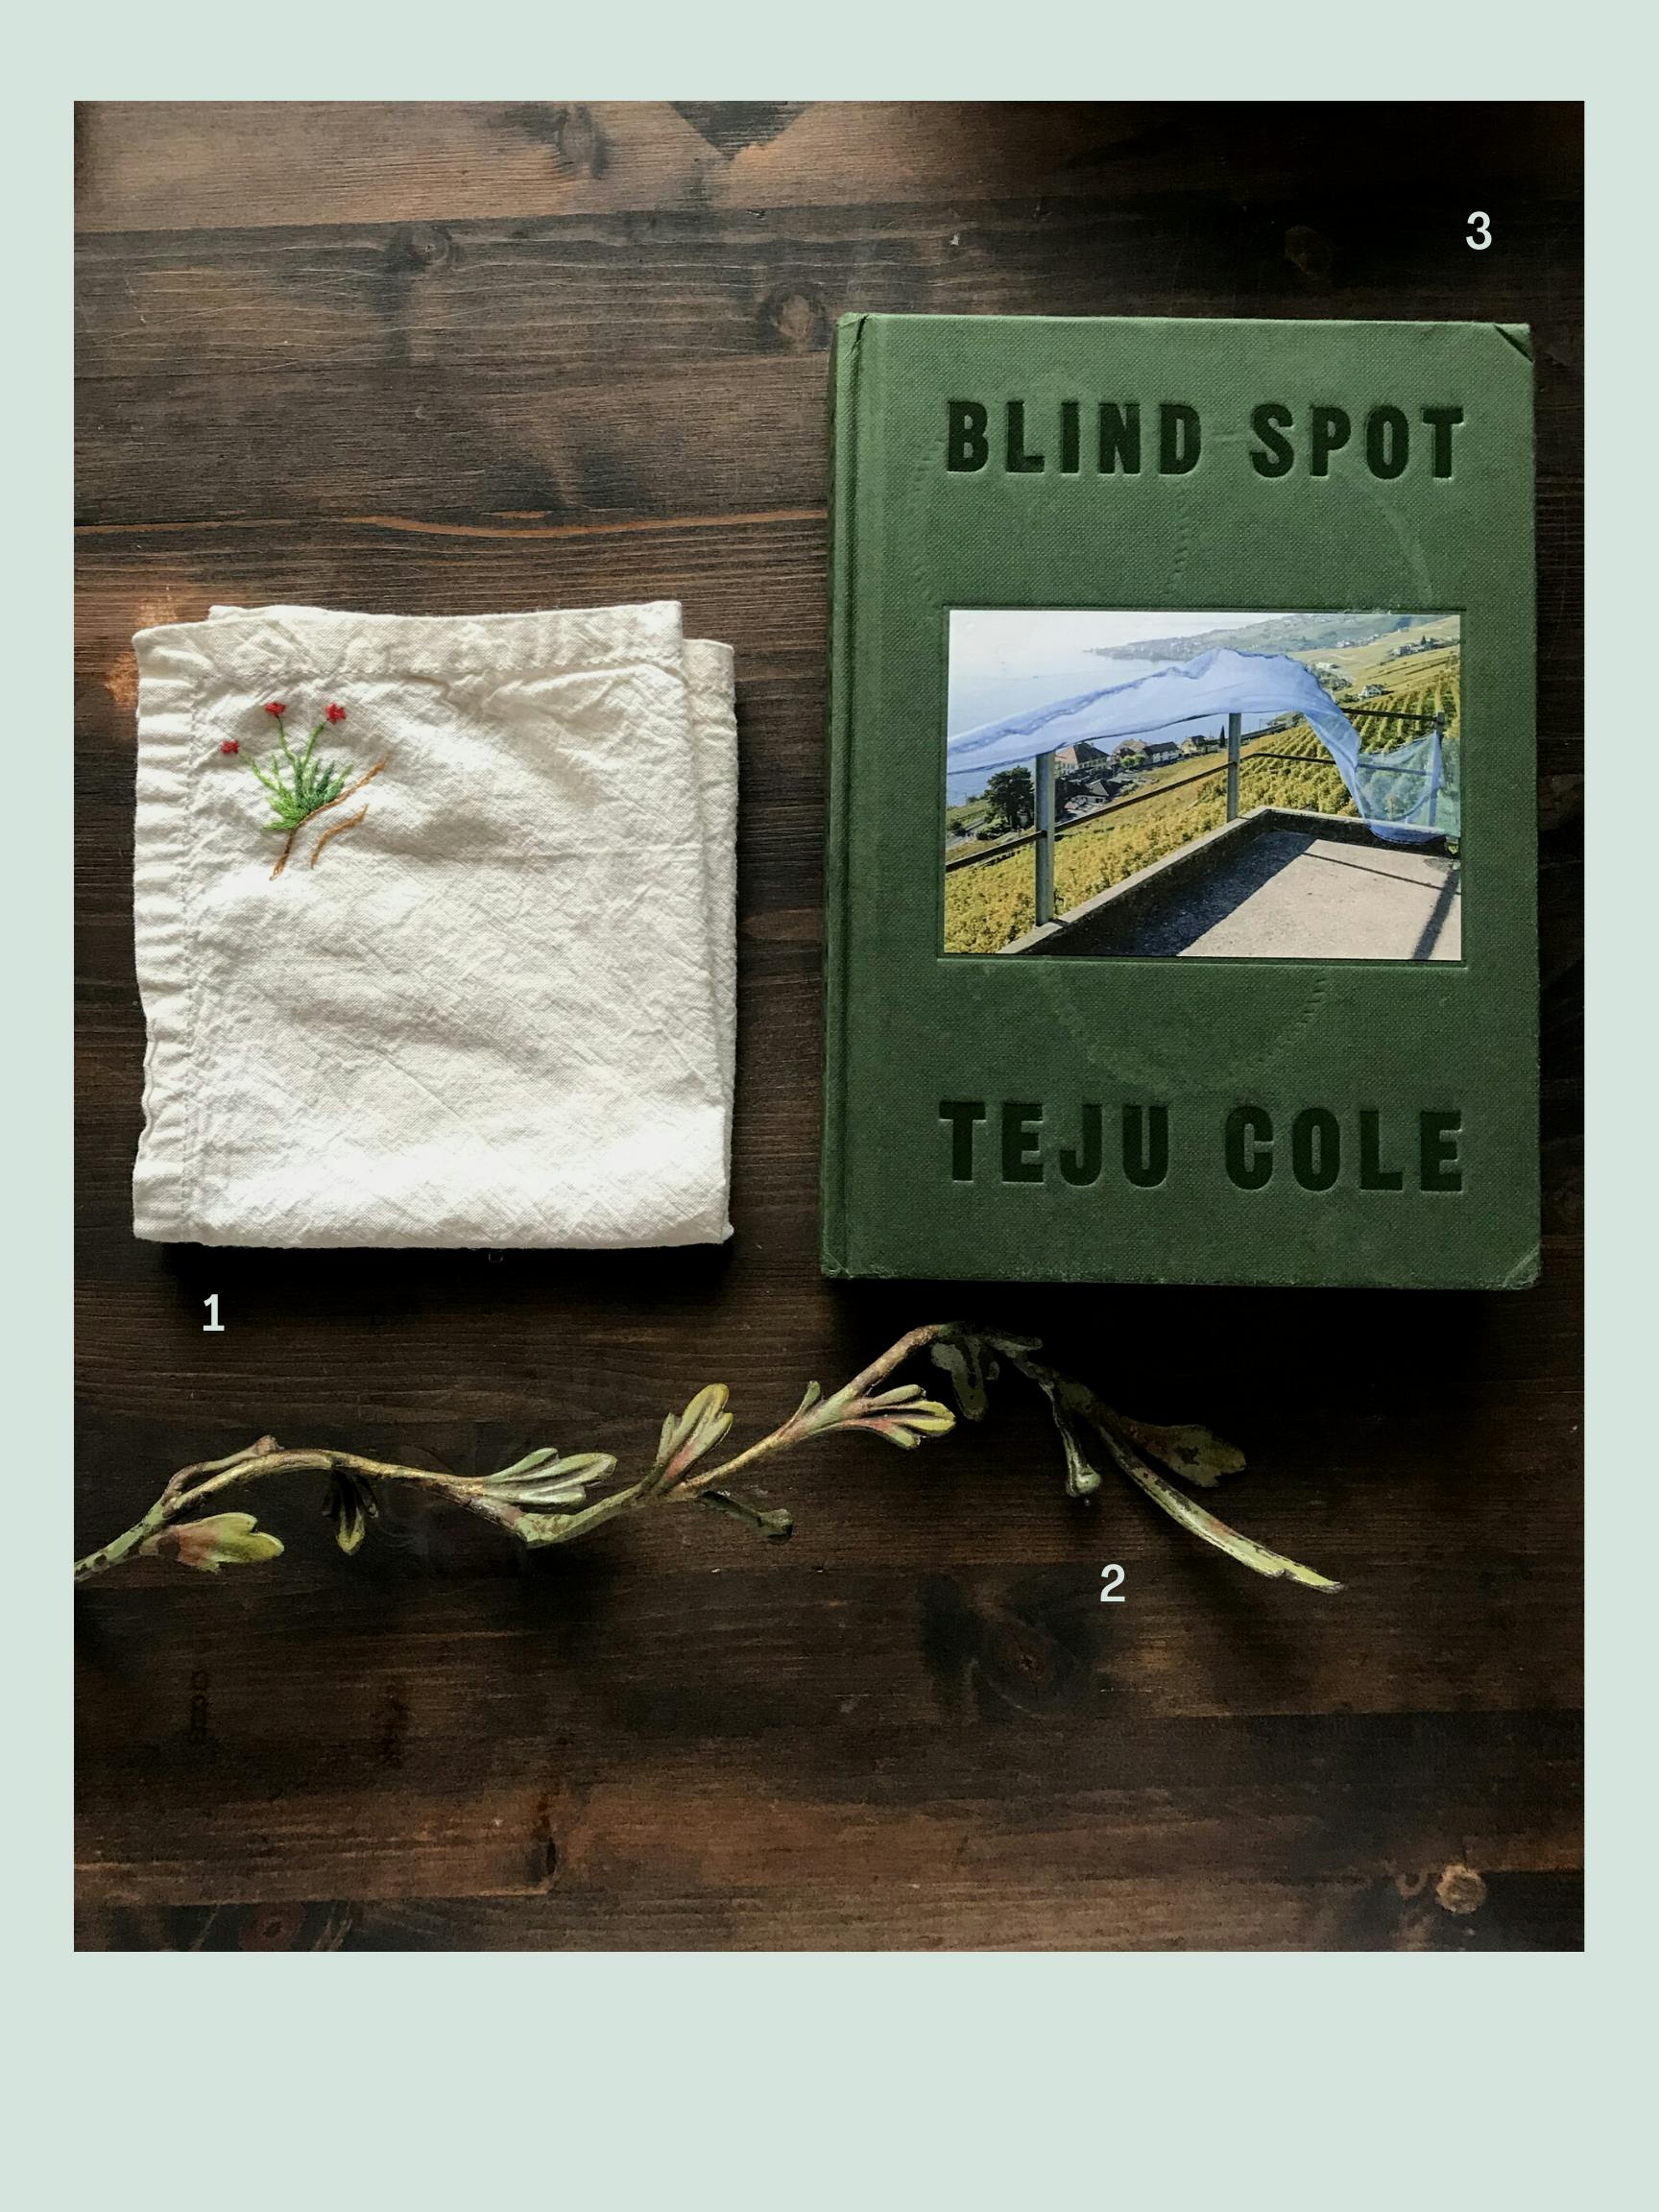 A collection of objects, labeled with small numbers, sits on a desk. From left to right, a cloth with a small embroidered blooming plant in the corner, a curly green piece of metal, with buds and leaves branching off a stem, and a green book titled "Blind Spot" by Teju Cole, with a photograph on the cover.